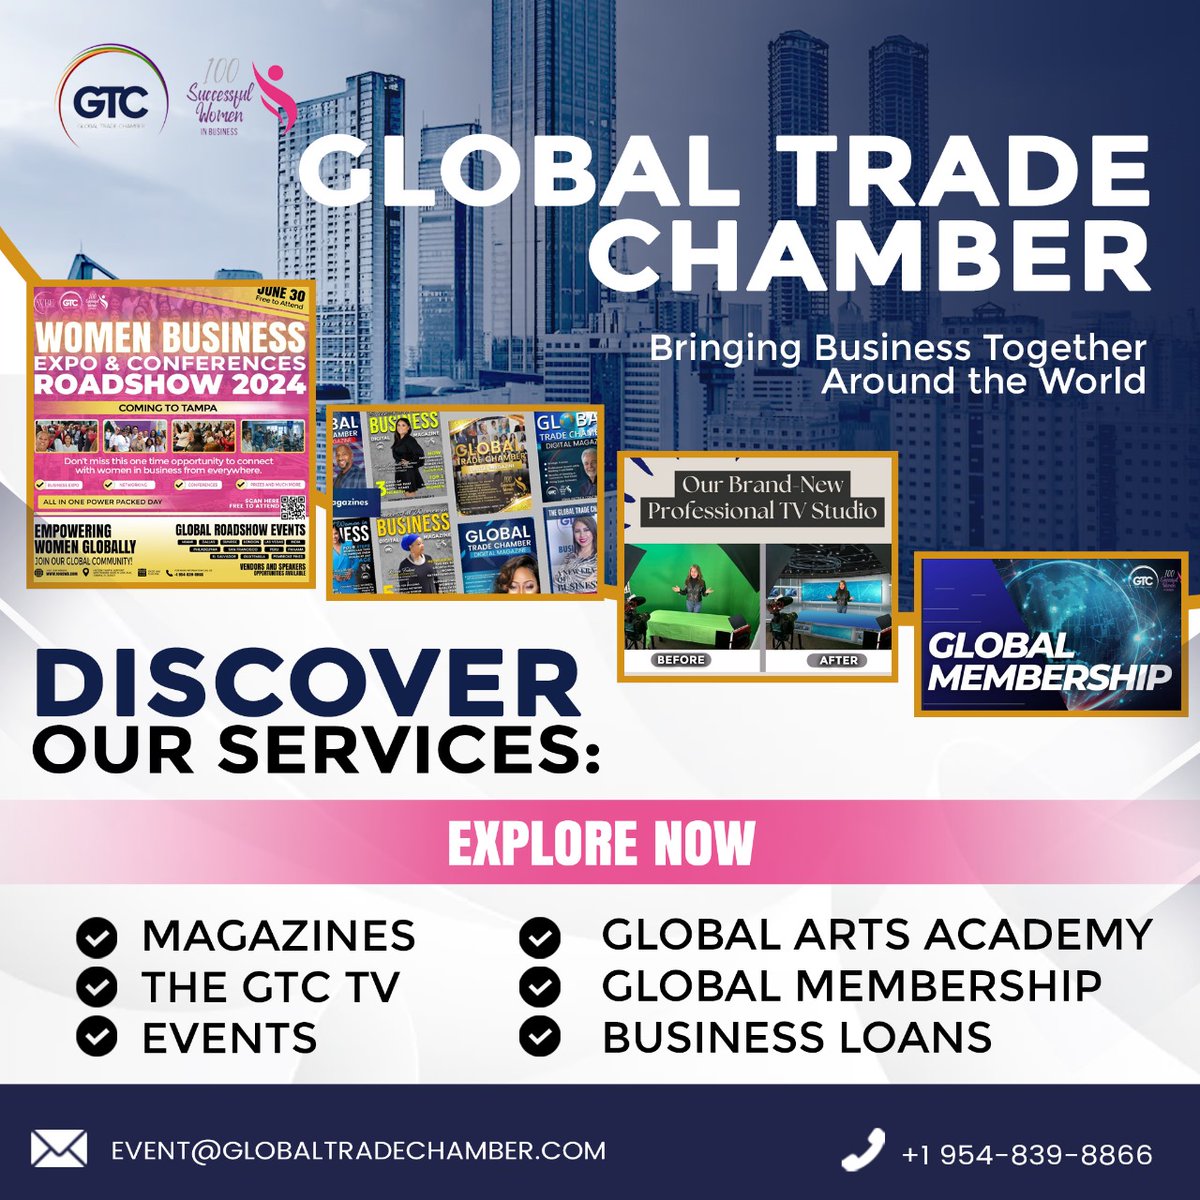 Ready to ignite your business journey with a burst of energy and inspiration? 

Join us in Las Vegas: 100swb.com/las-vegas-2024/
Join us in Tampa Florida: 100swb.com/tampa-2024/ 

#global_trade_chamber #gtc #smallbusiness #networking #womeninbiz #womenempowerment #womenforwomen